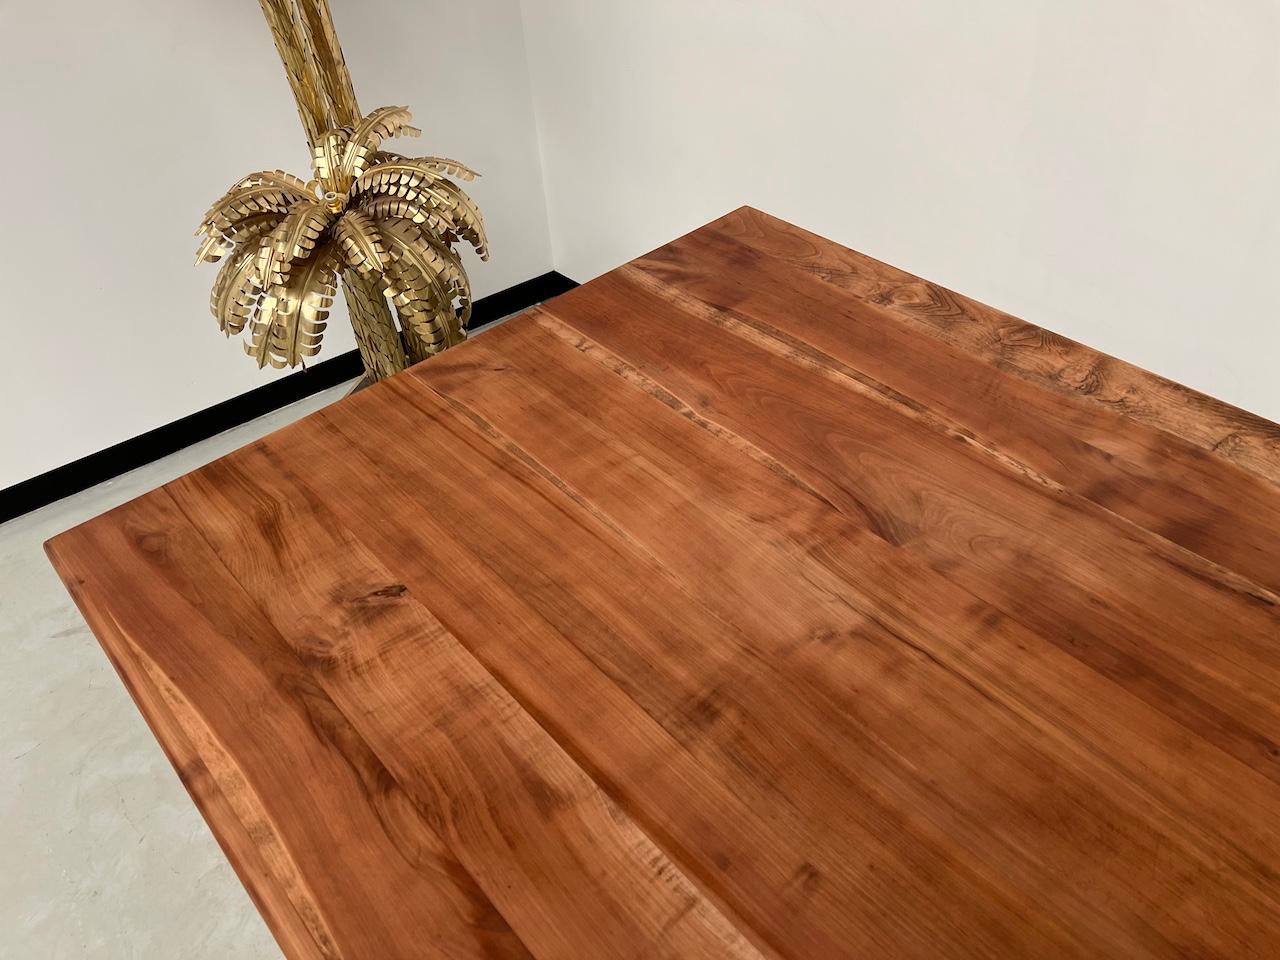 Large solid cherry farm table, 250 x 110 cm For Sale 3